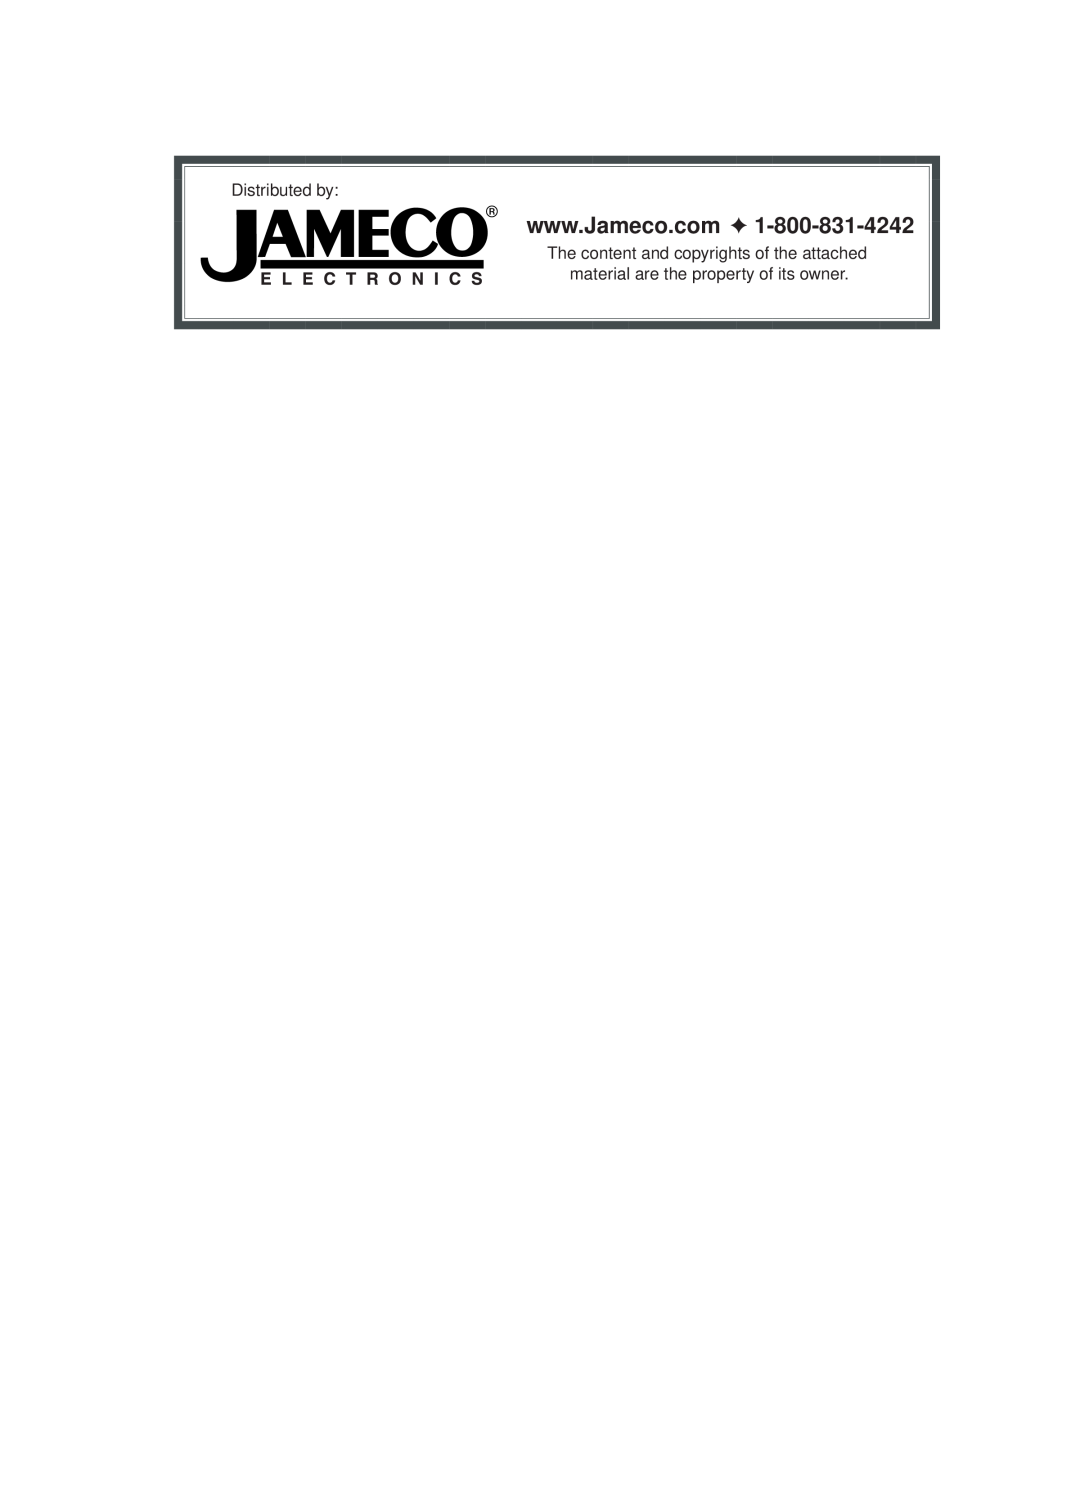 Jameco Electronics 2000, 3000 manual Distributed by 